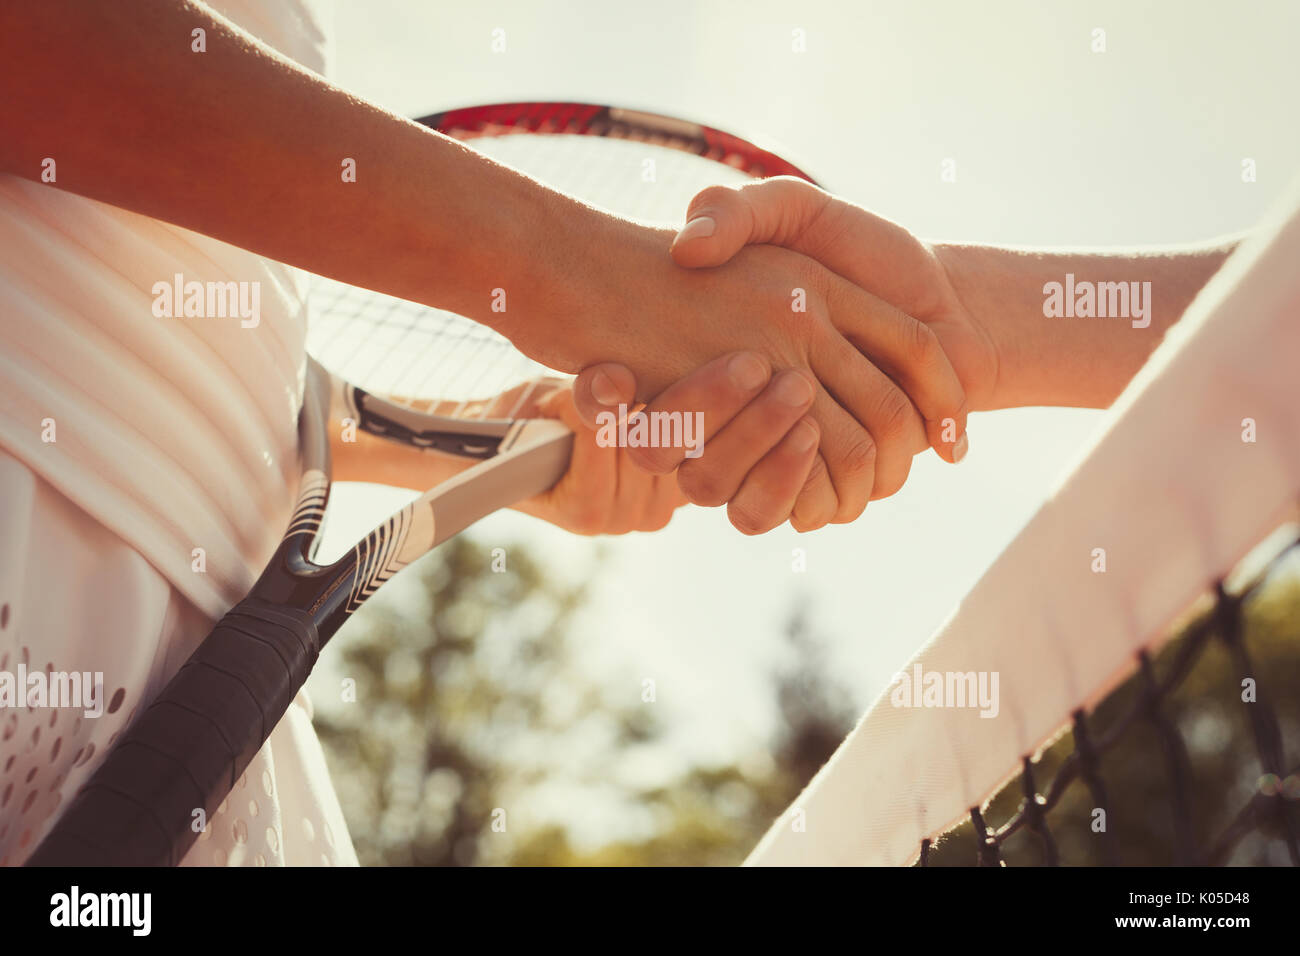 Close up tennis players handshaking in sportsmanship at net Stock Photo